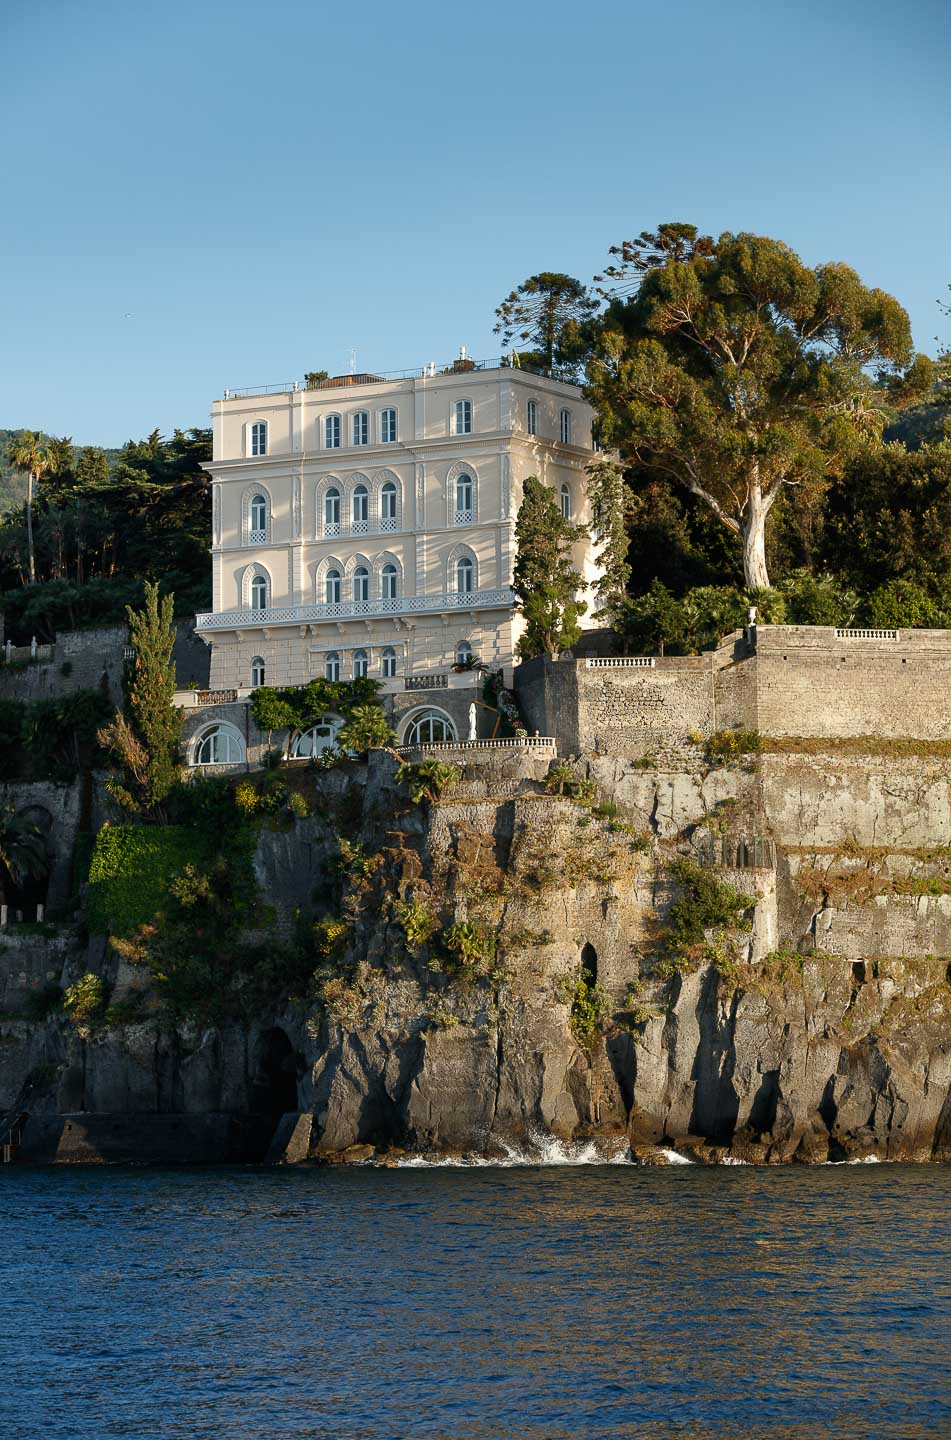 Villa Astor best luxurious private residence Amalfi coast italy important historic propery available for rental exclusive events weddings luxury accommodation and travel